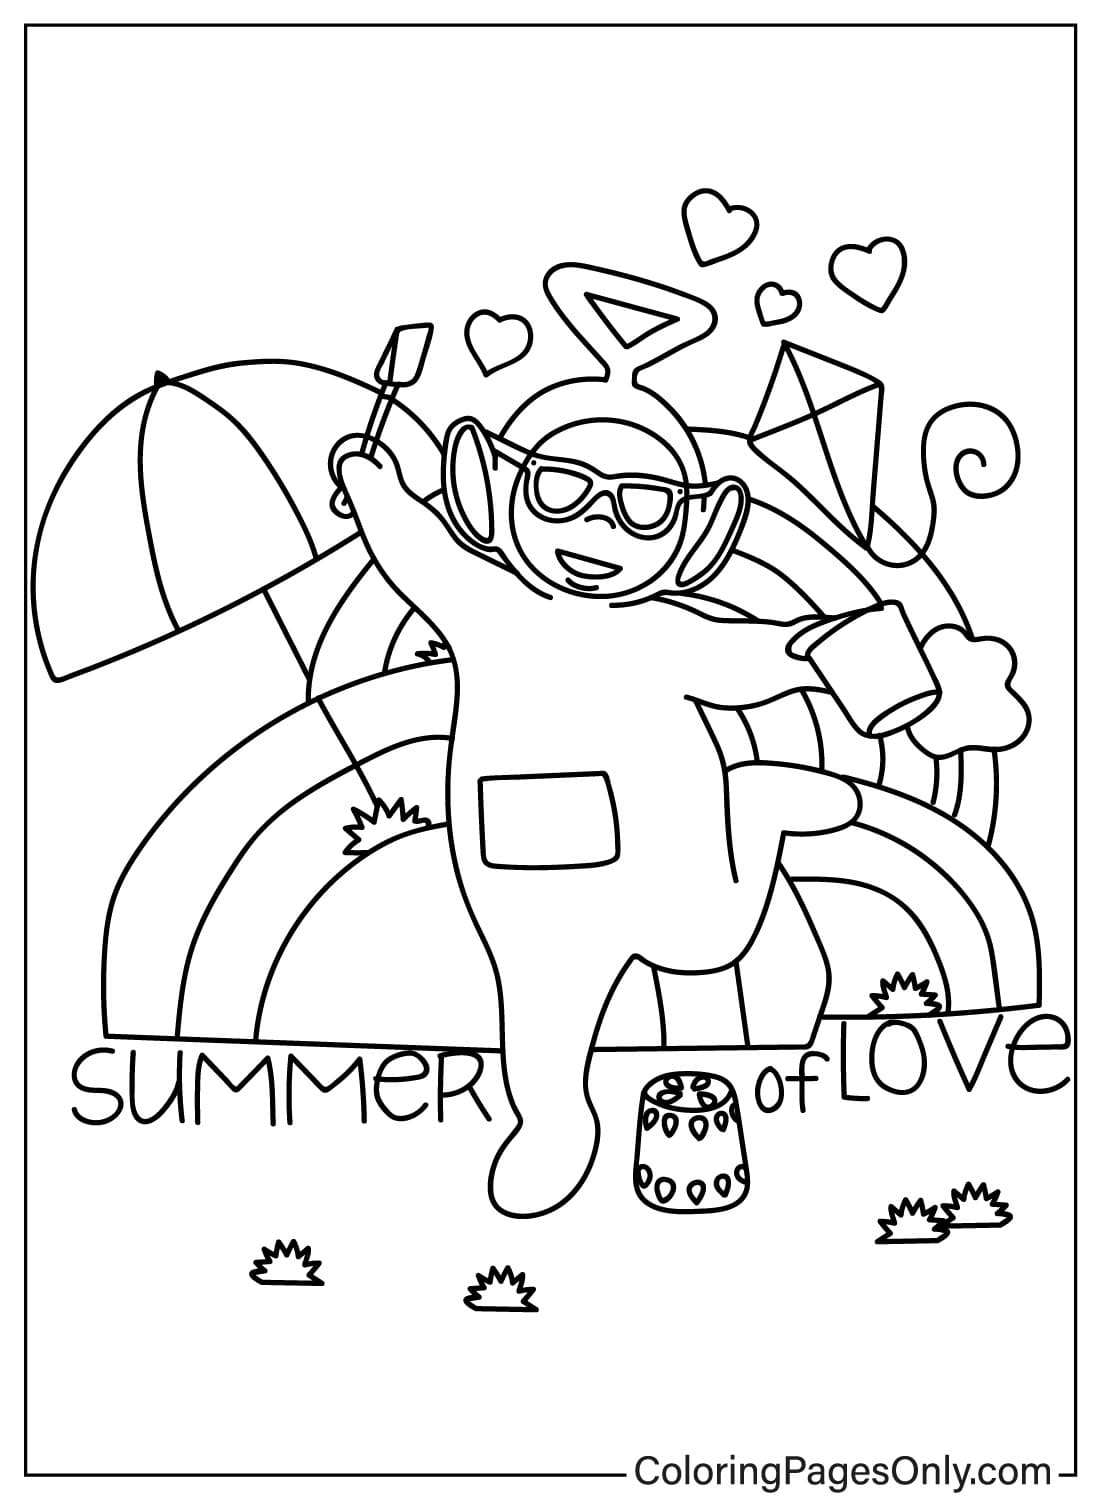 Tinky-Winky Coloring Page Free from Teletubbies - WildBrain